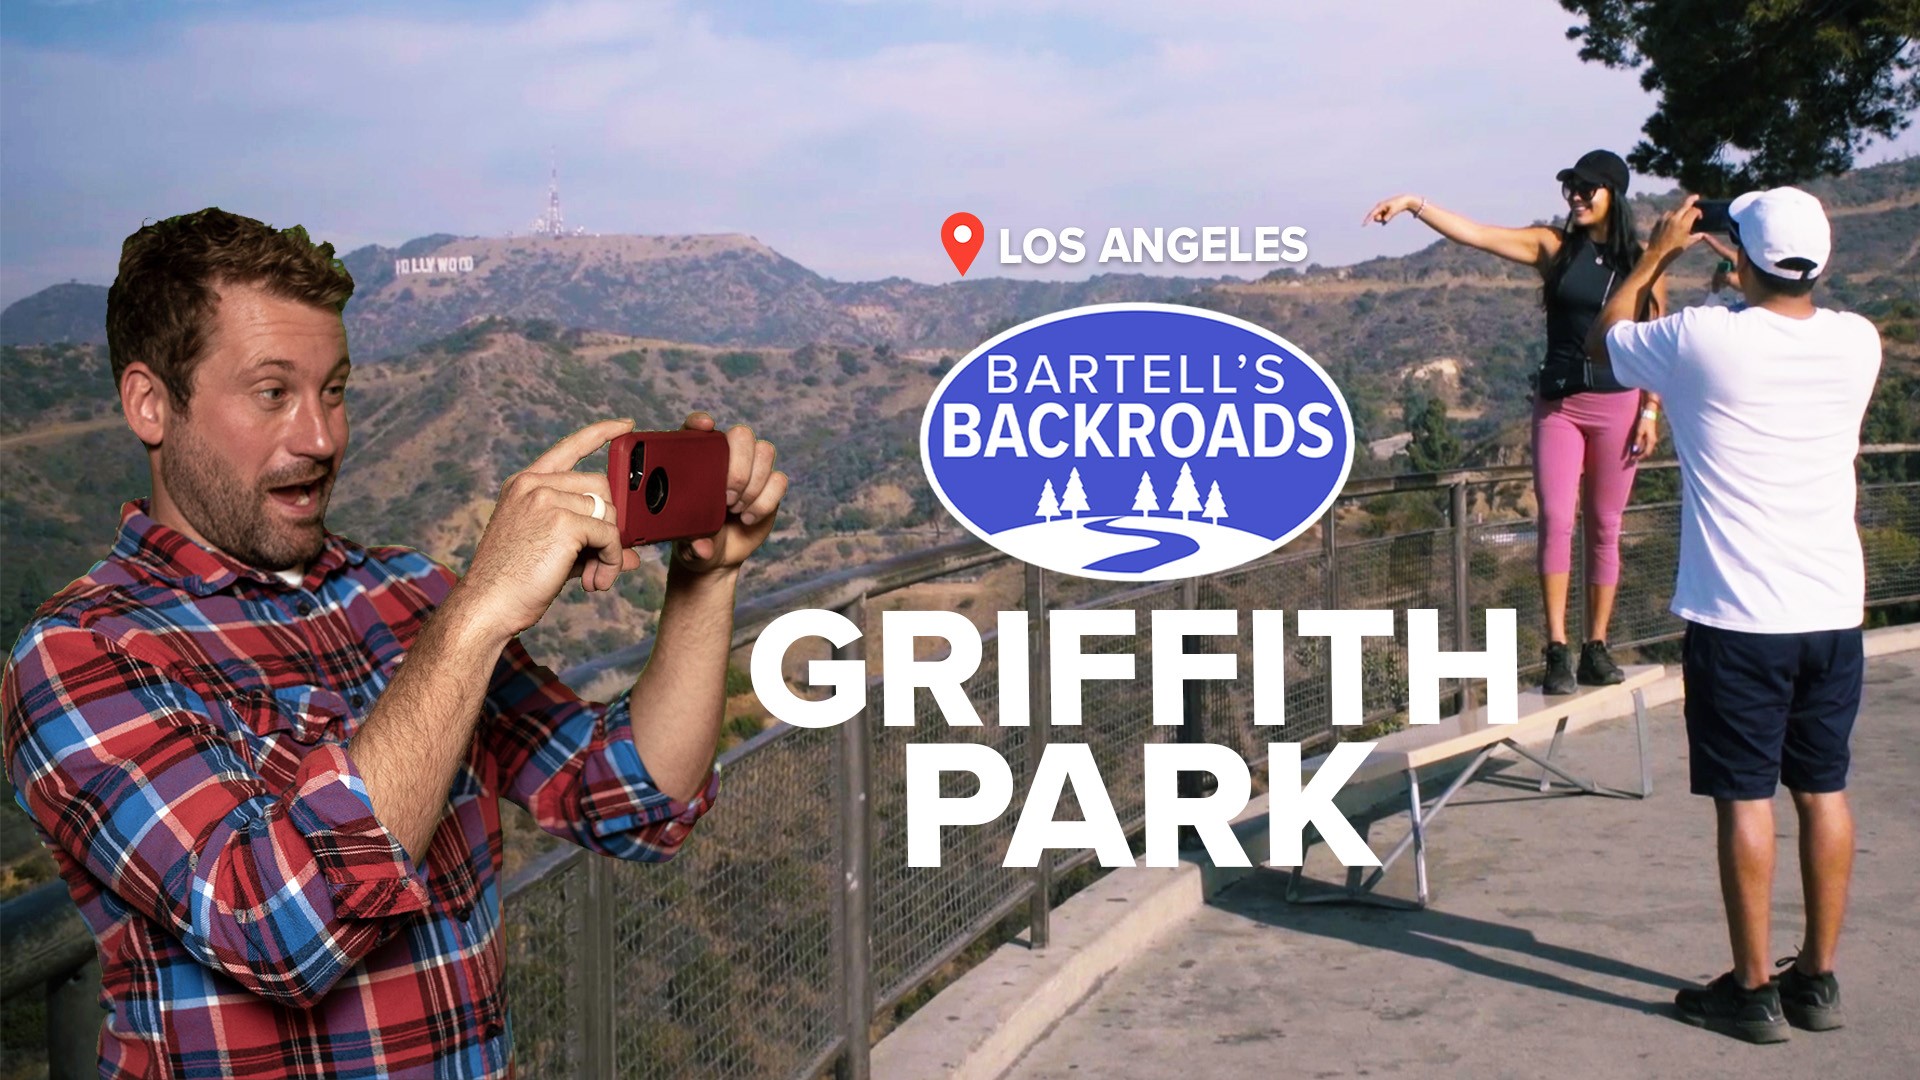 Griffith Park is an icon, but its founder is not. How a fake 'colonel' who shot his wife changed the urban landscape of Los Angeles.